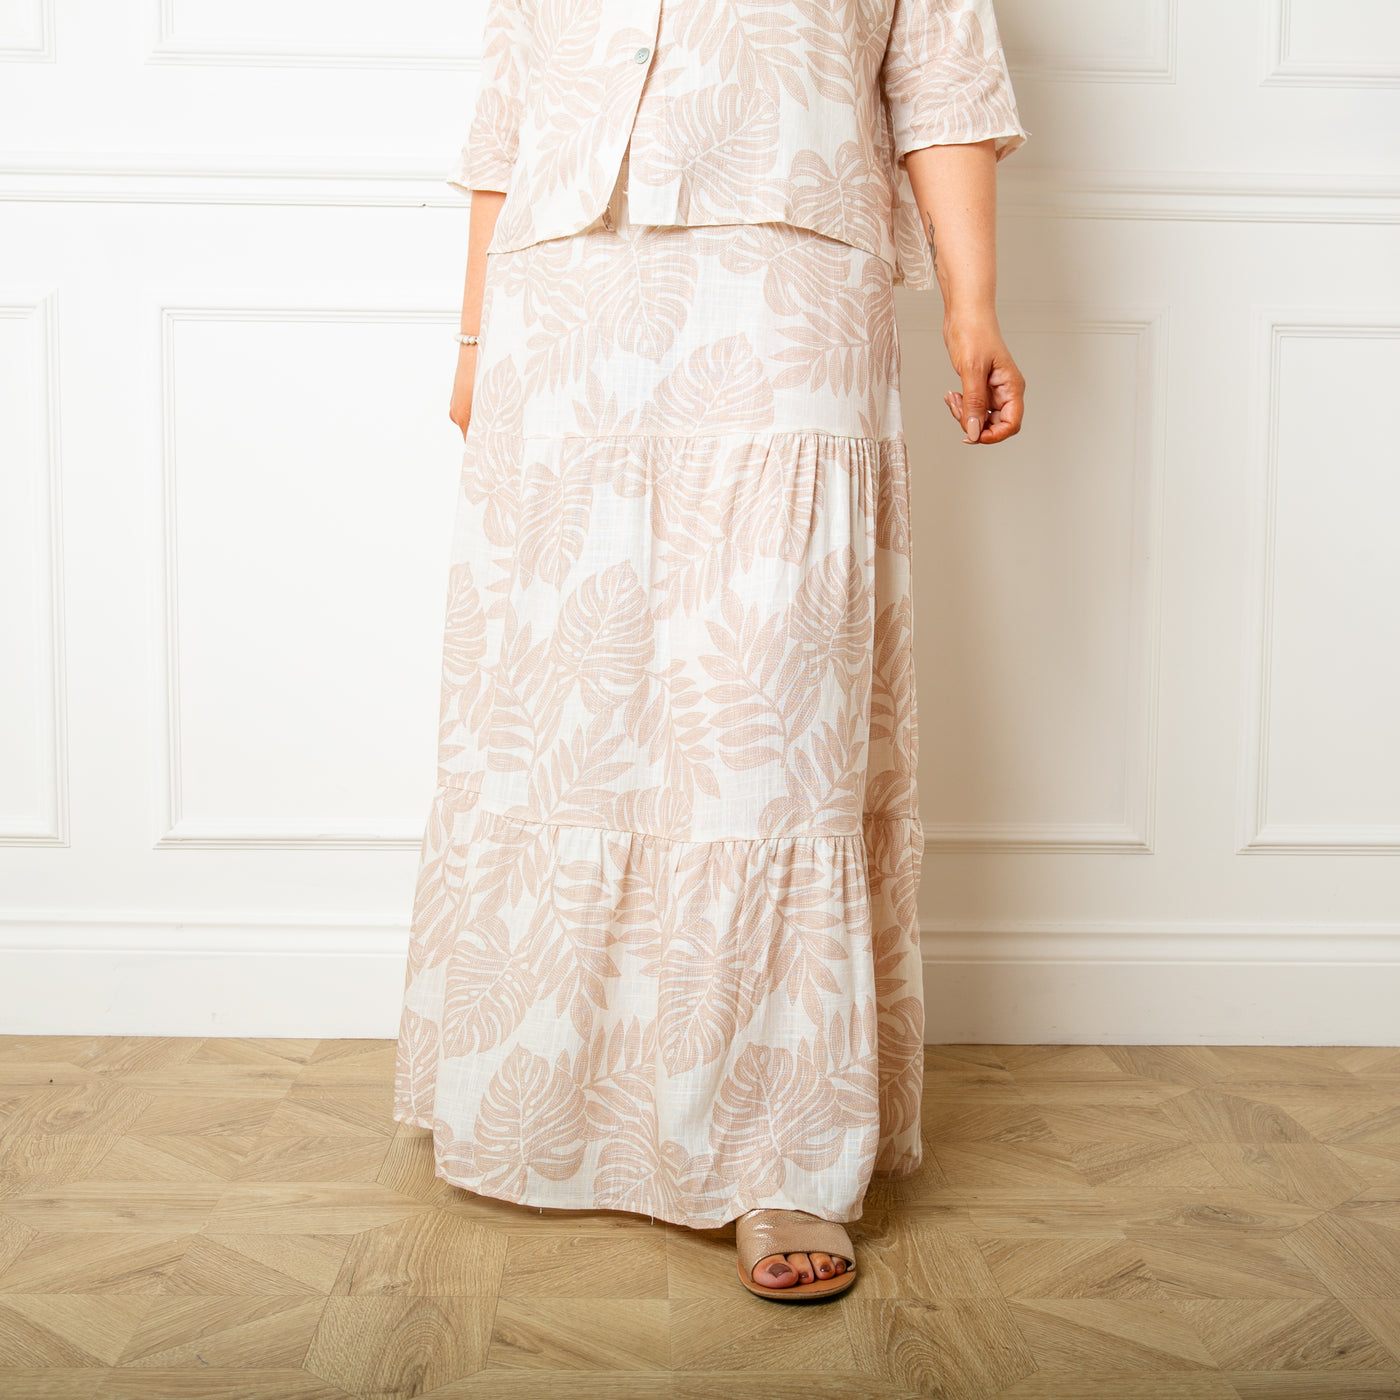 The cream Linen Leaf Tiered Skirt with an elasticated waistband for extra comfort